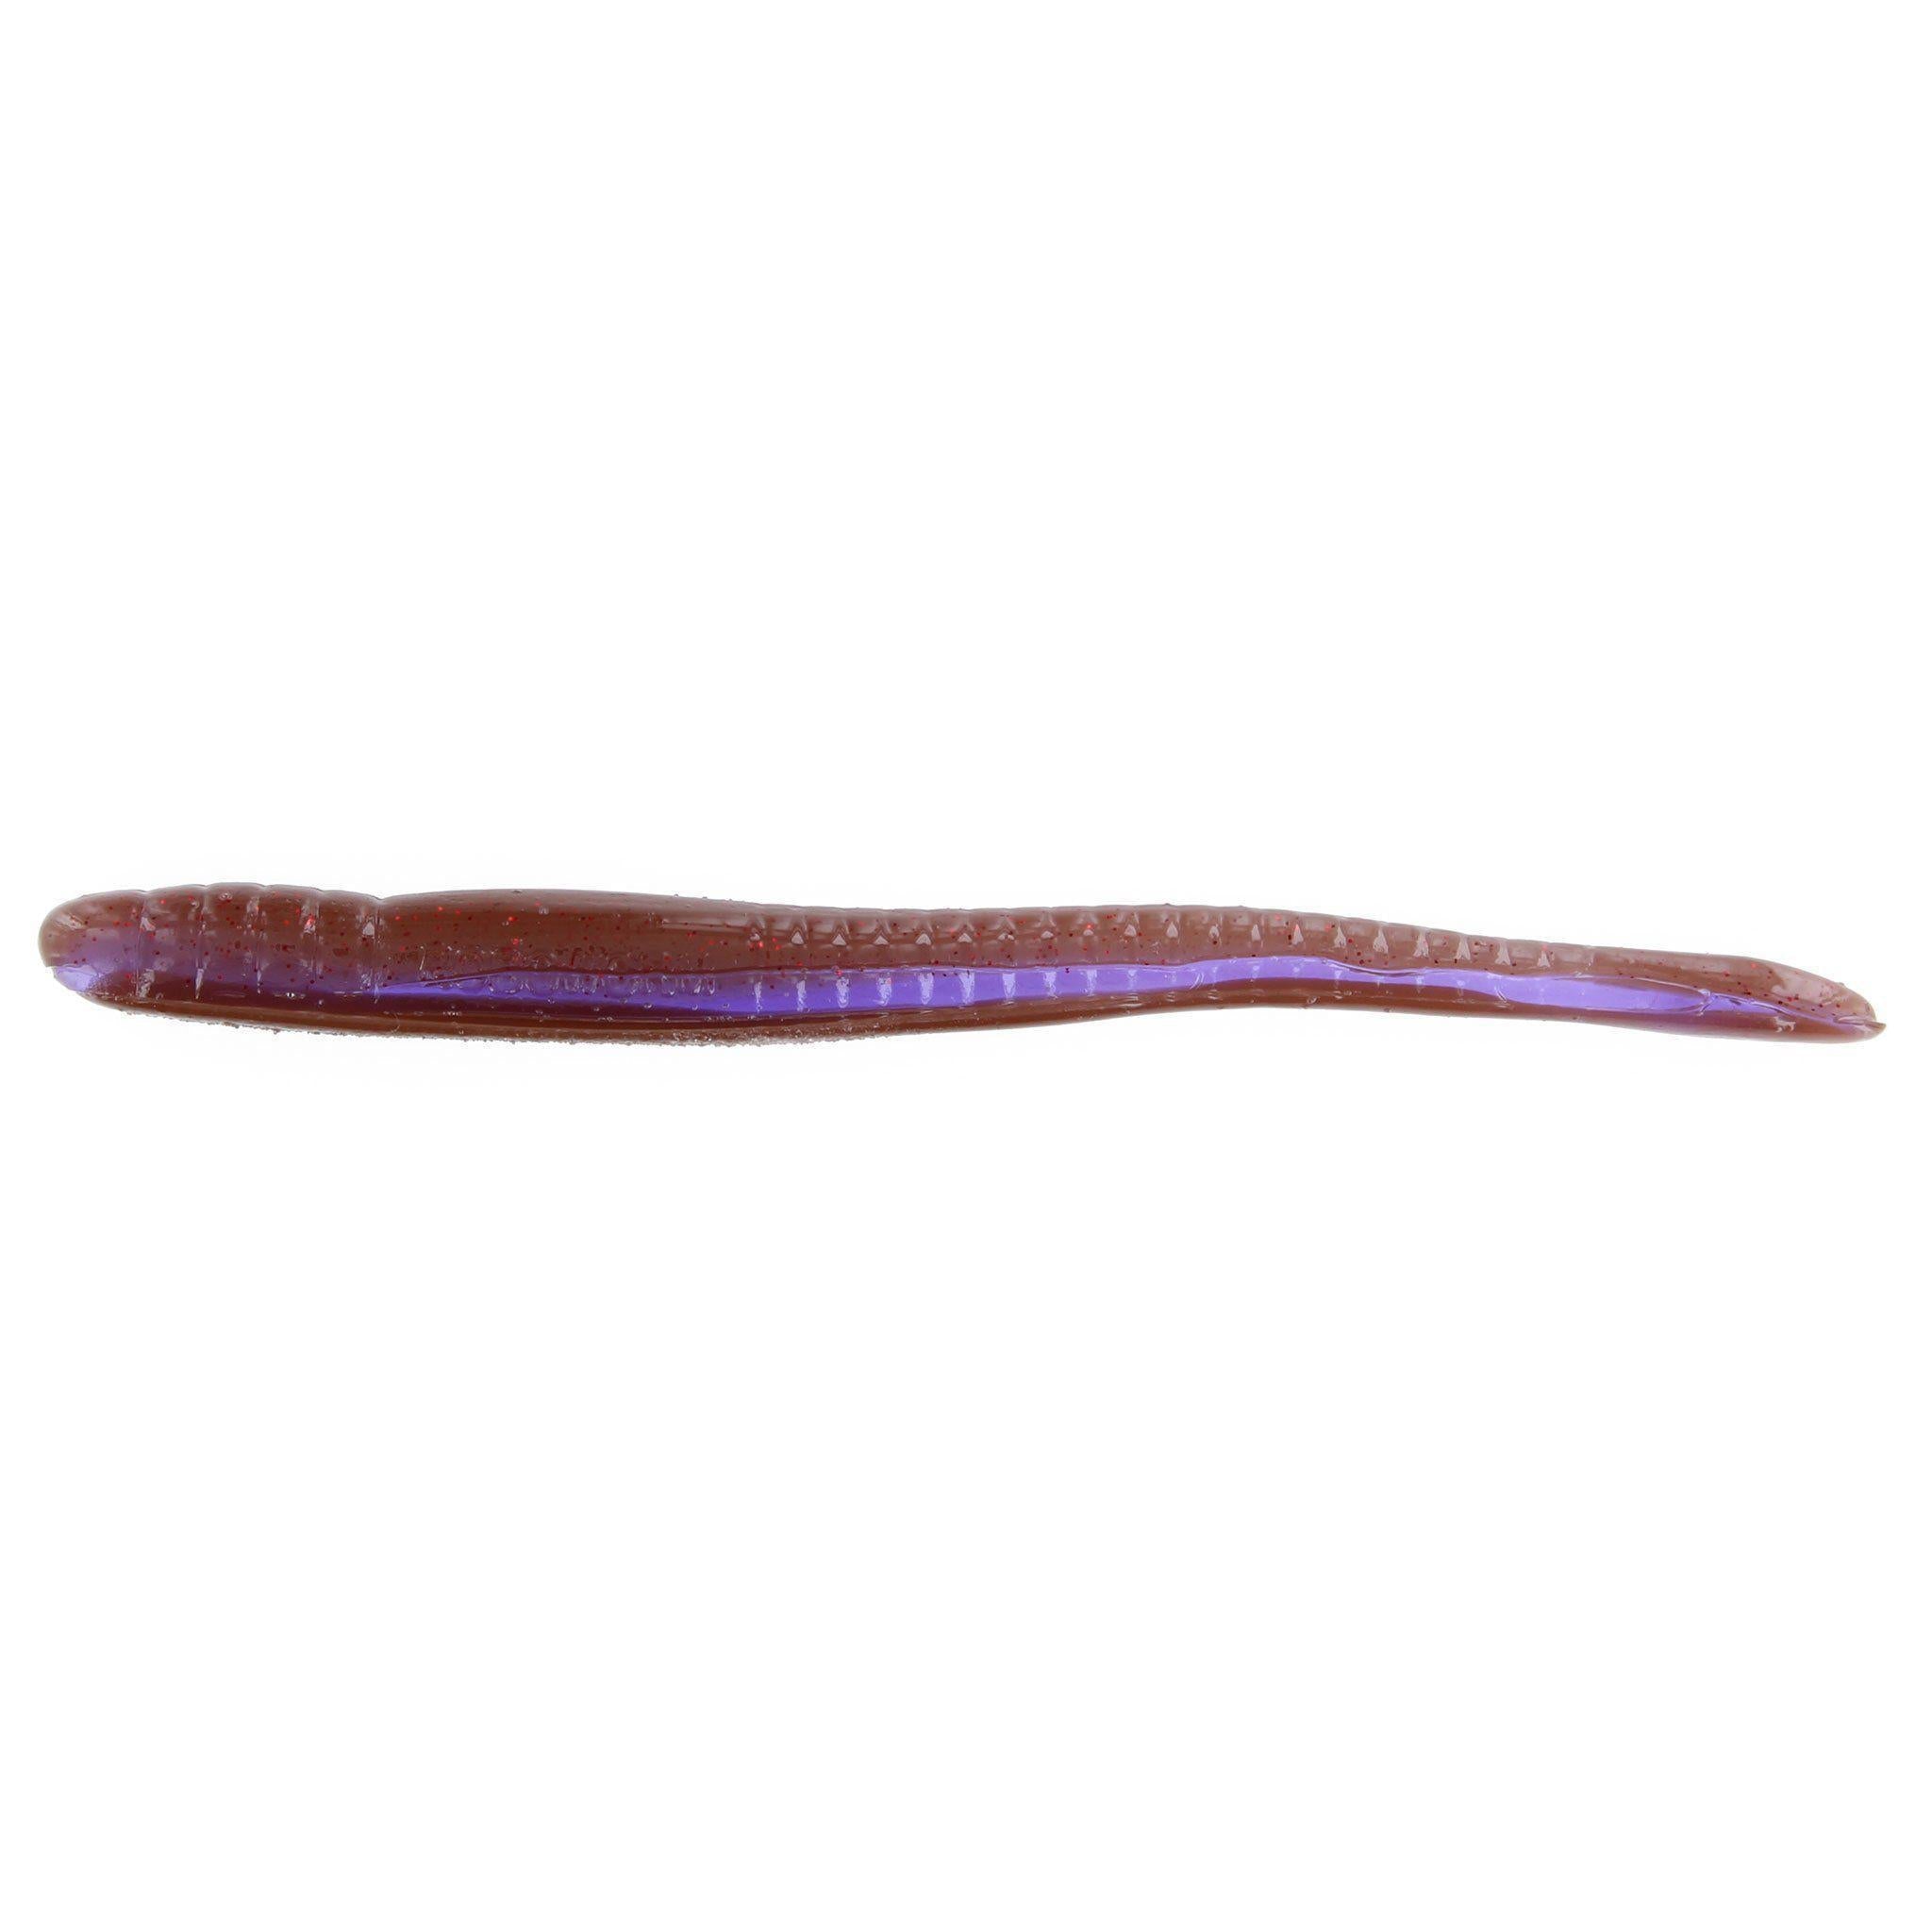 Roboworm Fat Straight Tail Worm - Oxblood Light Red Flake